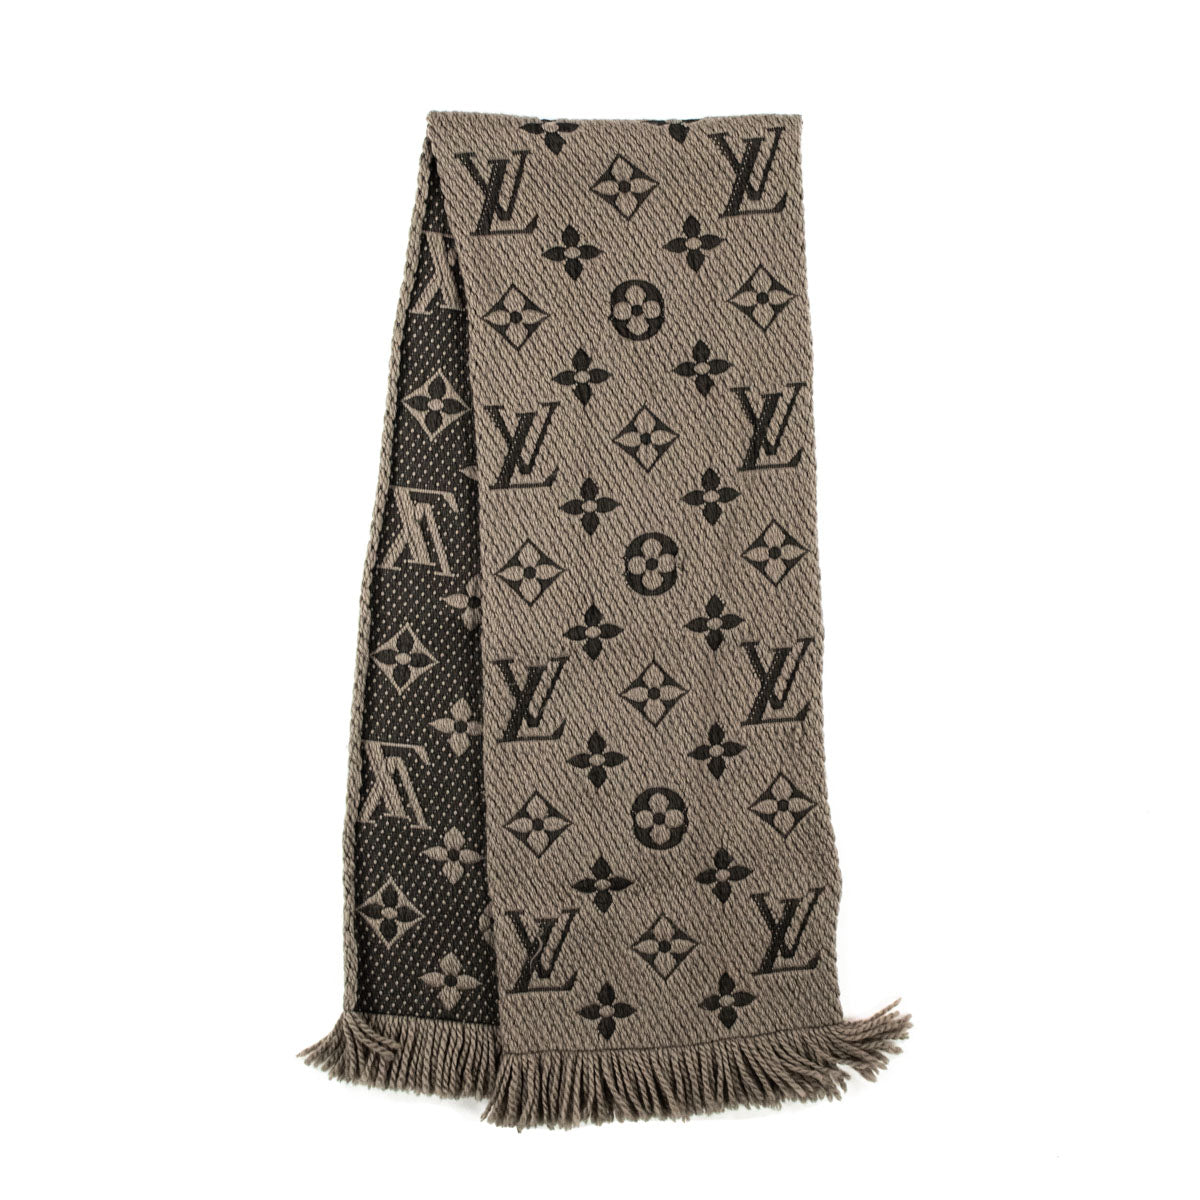 Louis Vuitton scarf light brown replica A quality scarf can be a great and  the best gift !!! Replica of a famous brand! The scar COLOR Taupe